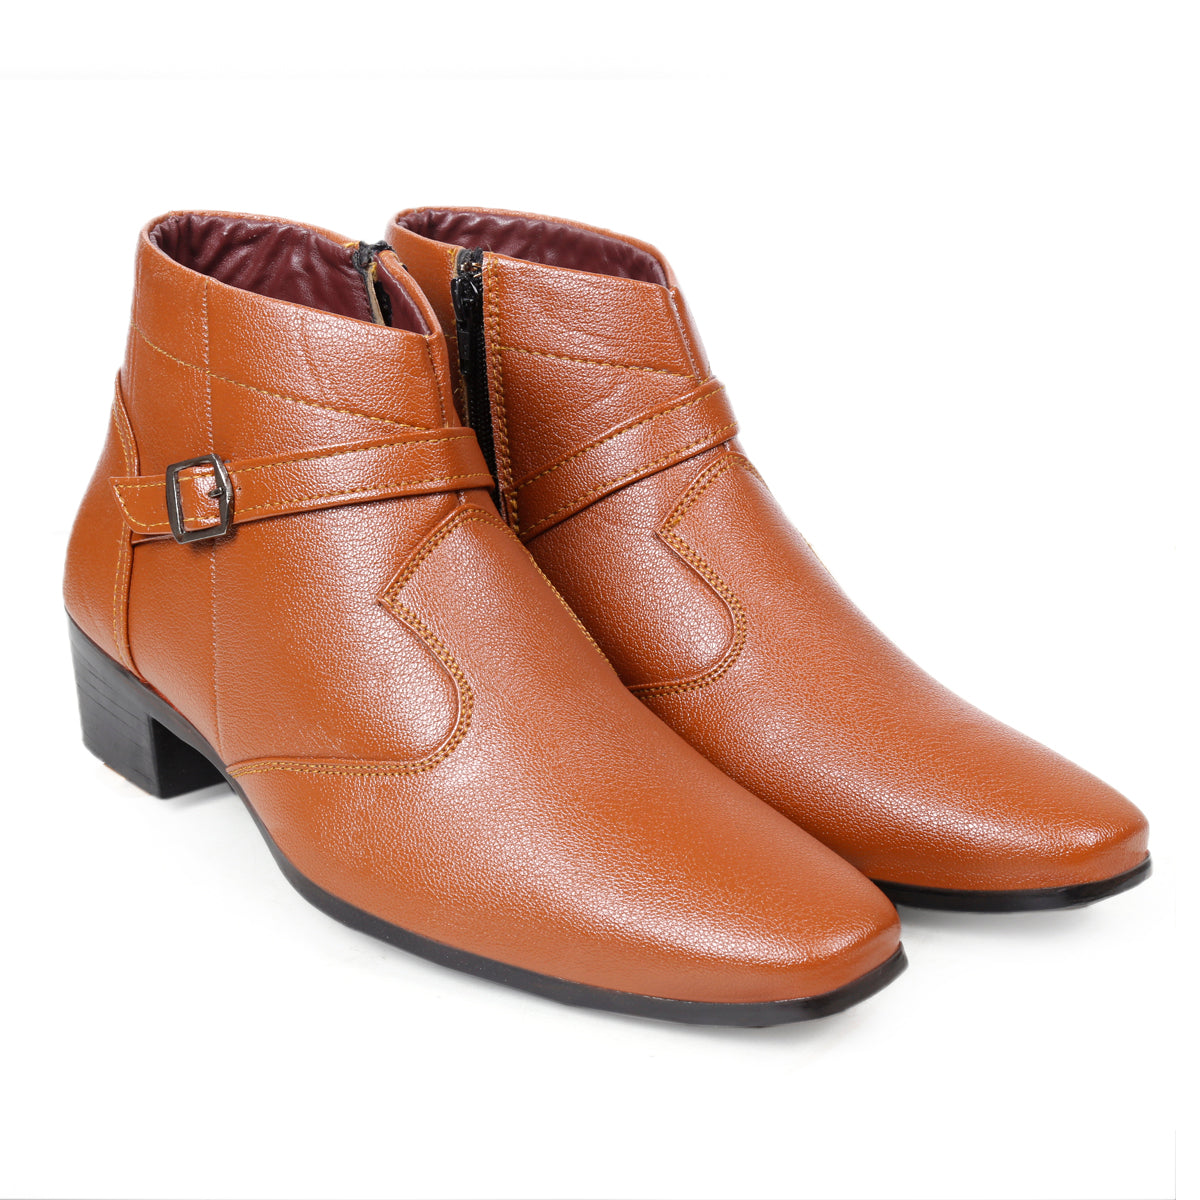 BXXY Men's Height Increasing Vegan Leather Ankle Length Boots